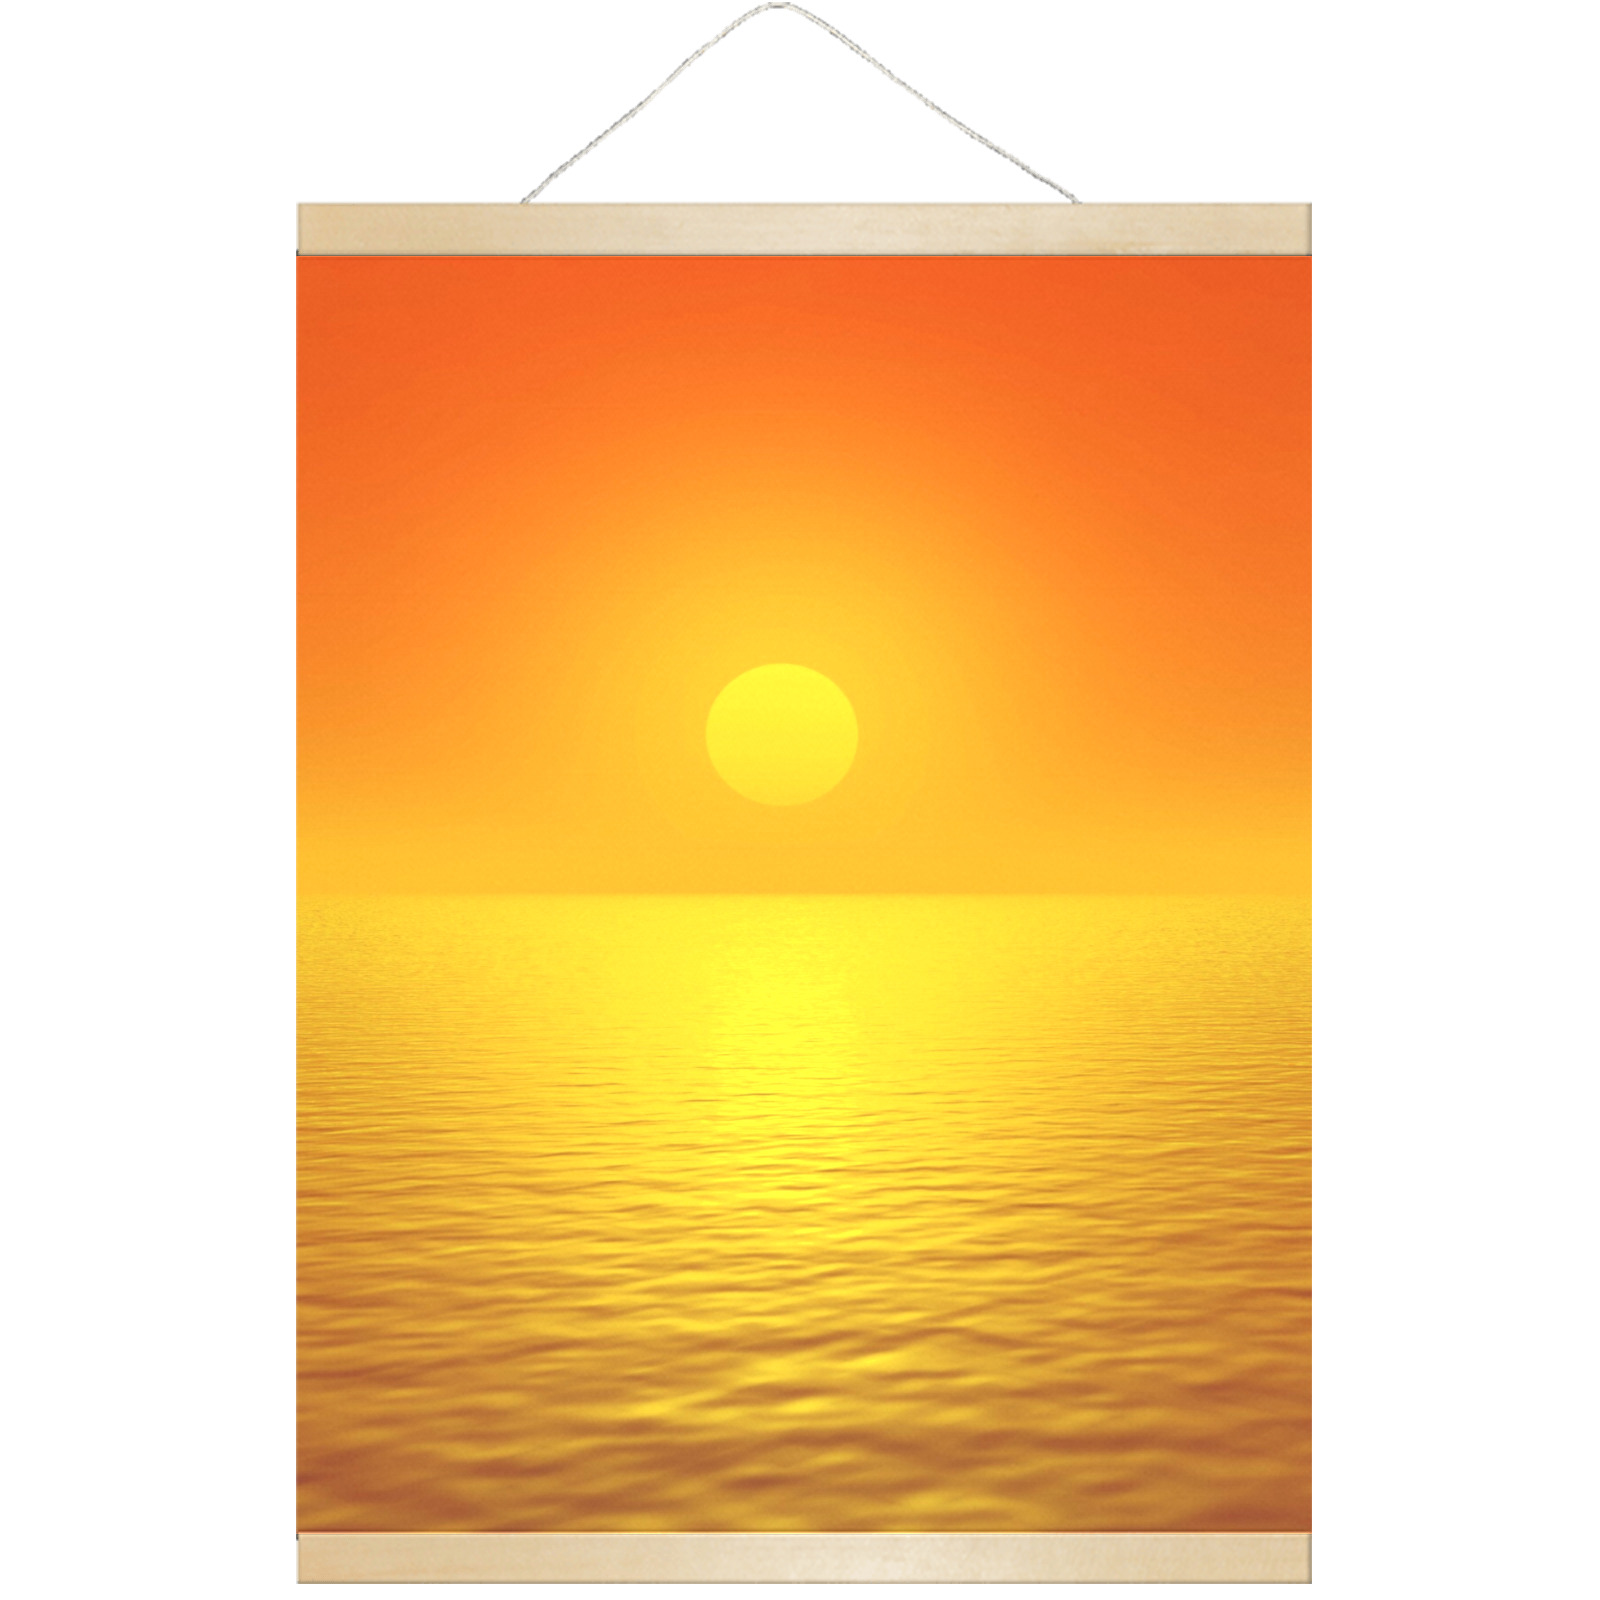 Sunset Reflection Hanging Poster 18"x24"